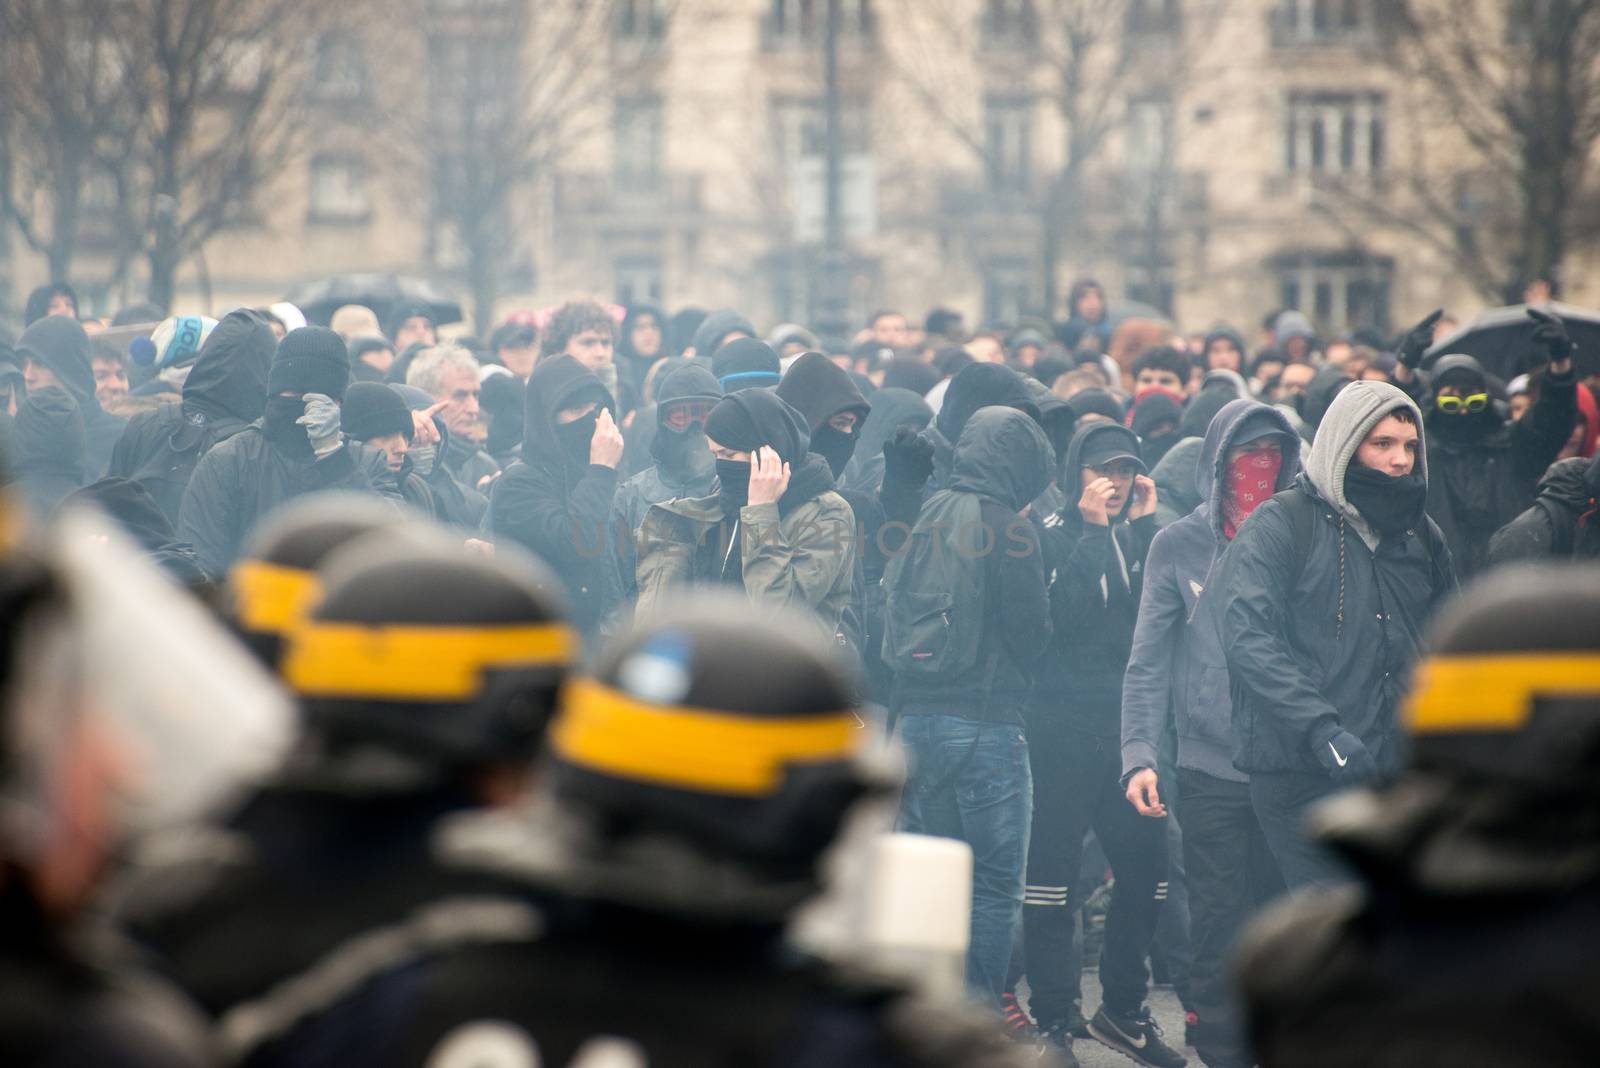 FRANCE, Paris: Protesters clash with French riot police officers as thousands demonstrate against the French government's planned labour law reforms on March 31, 2016 in Paris. France faced fresh protests over labour reforms just a day after the beleaguered government of President Francois Hollande was forced into an embarrassing U-turn over constitutional changes. 